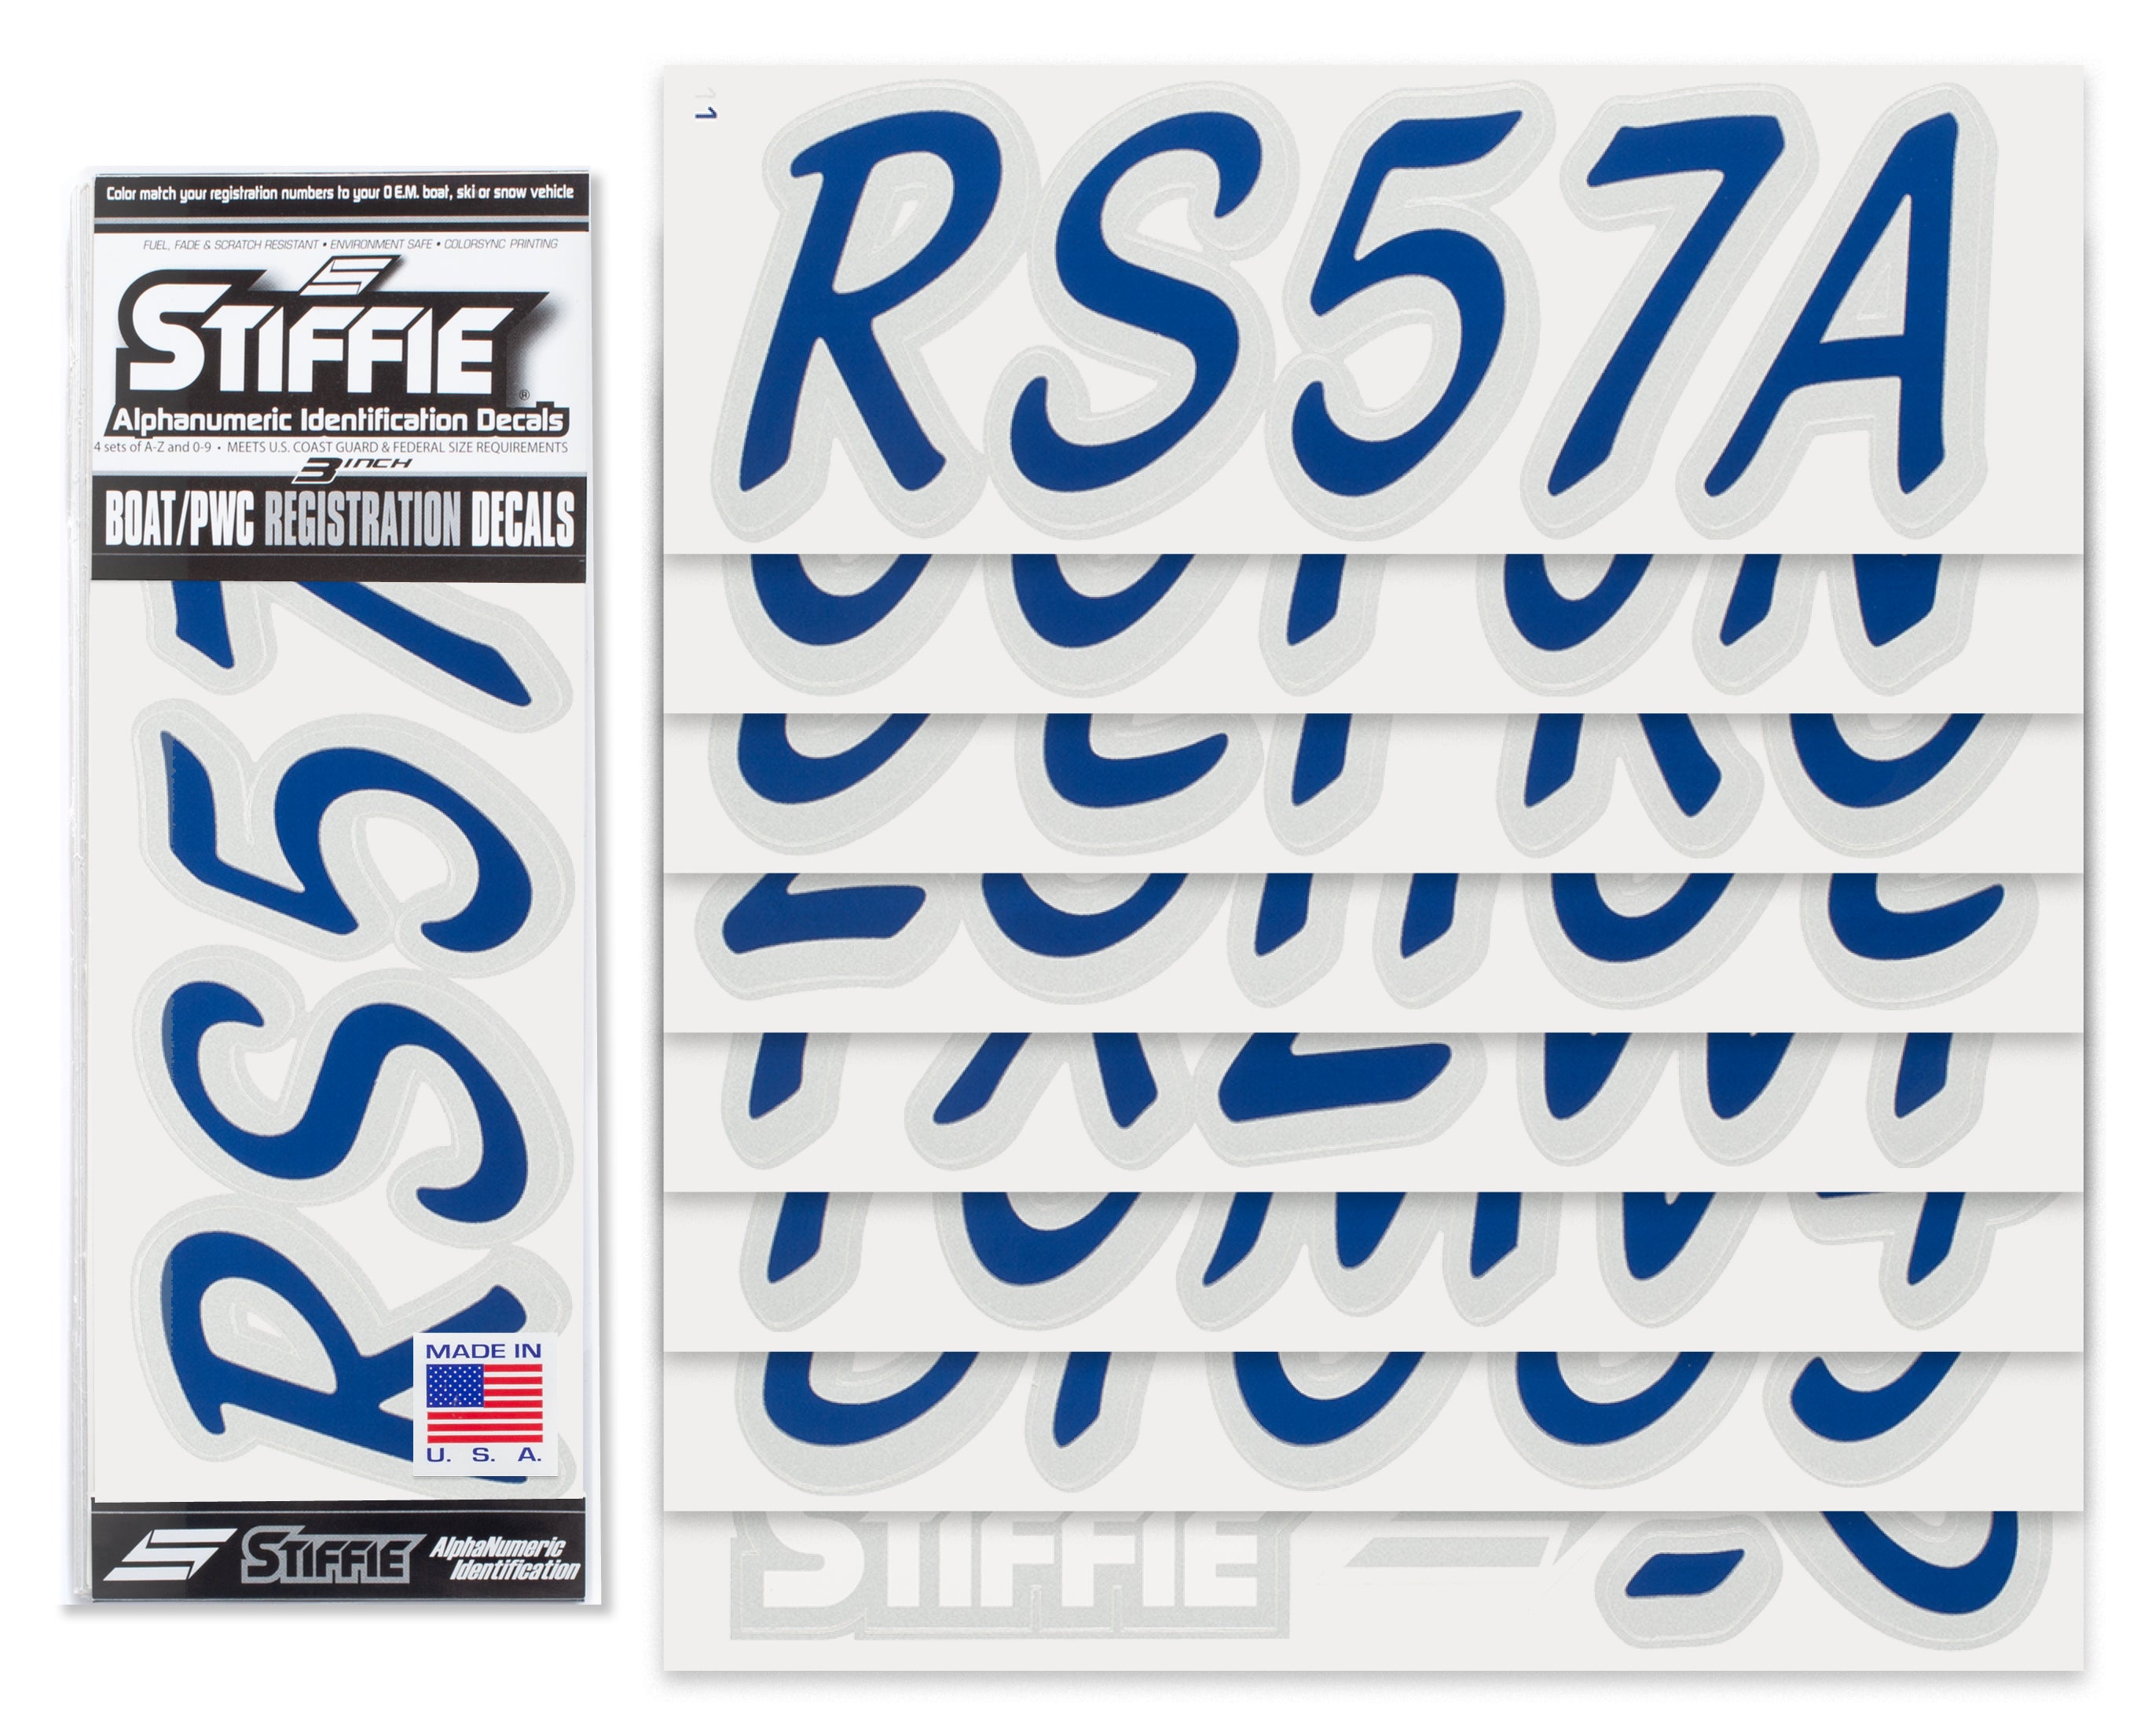 STIFFIE Whipline Solid Navy/Metallic Silver 3" Alpha-Numeric Registration Identification Numbers Stickers Decals for Boats & Personal Watercraft